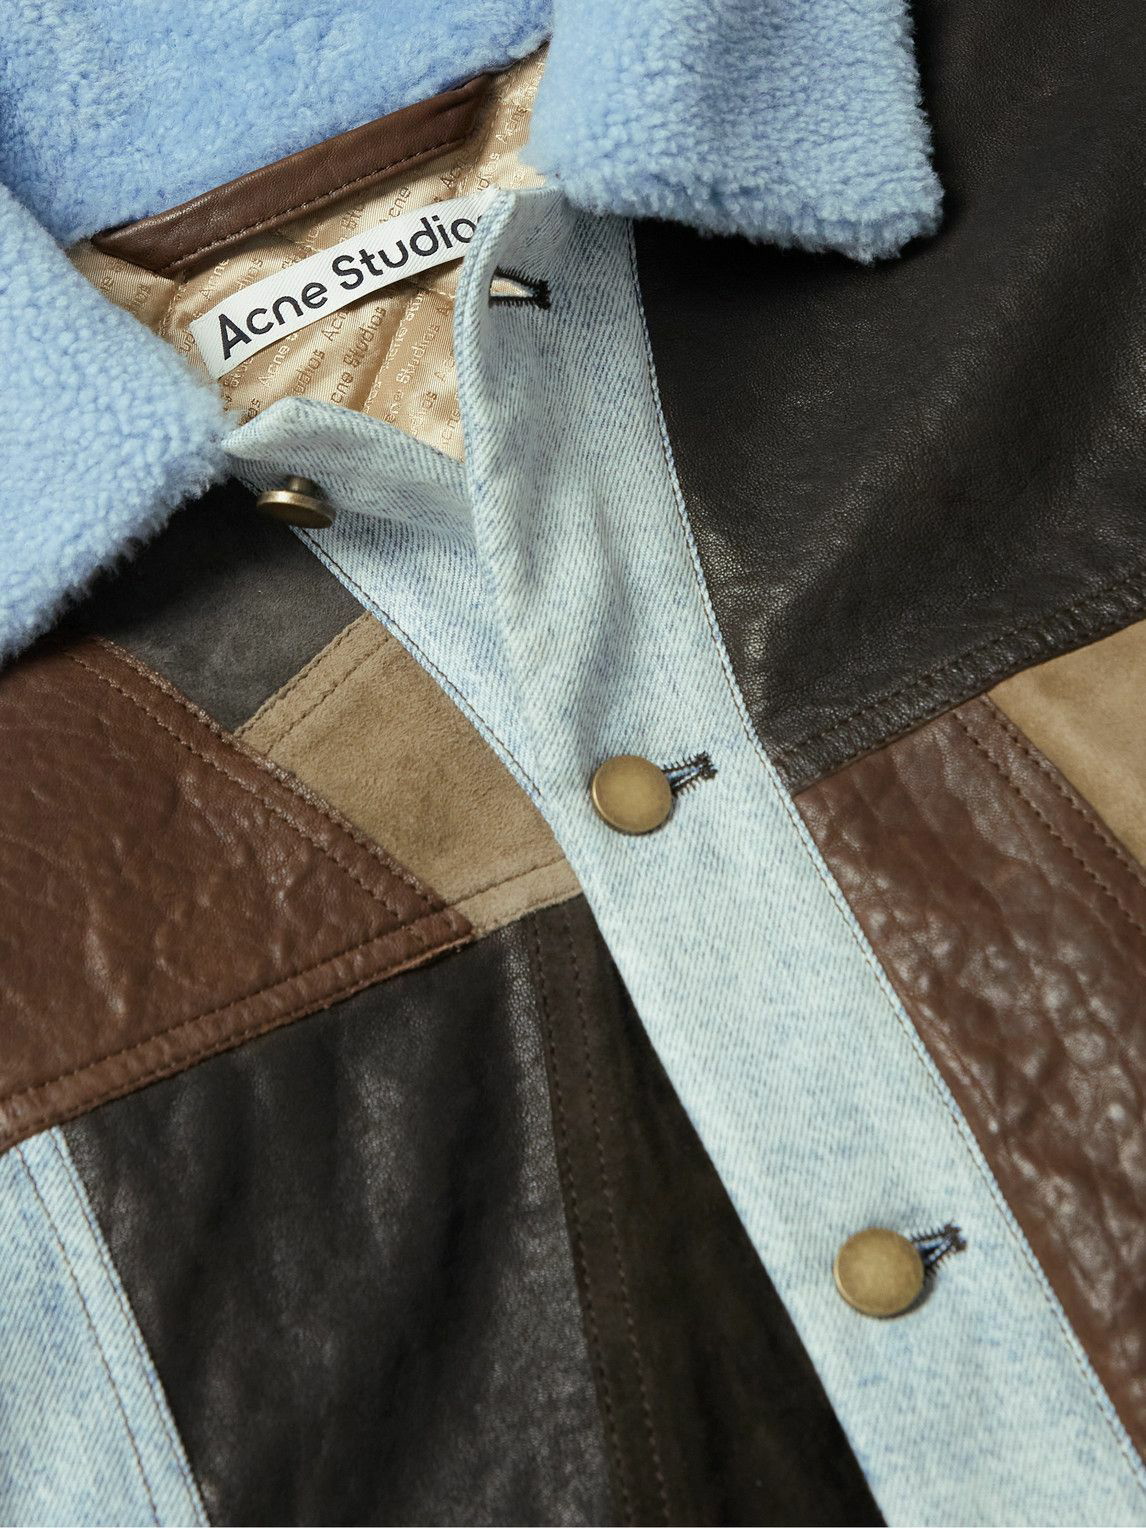 Shearling-Trimmed Patchwork Leather and Denim Jacket